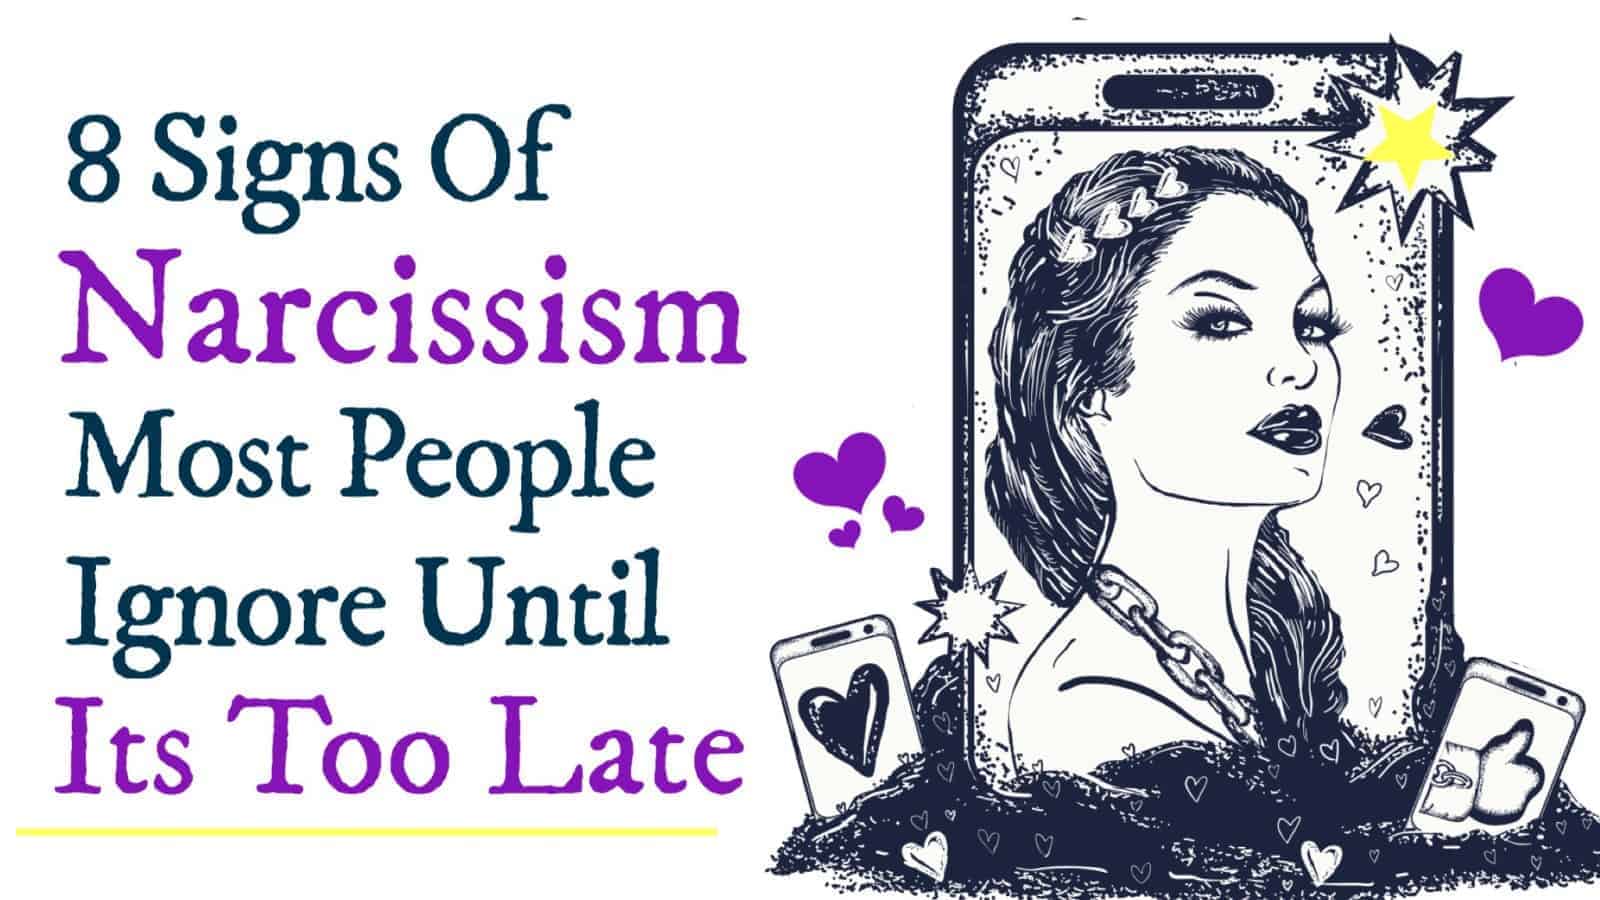 8 Signs Of Narcissism Most People Ignore Until Its Too Late.